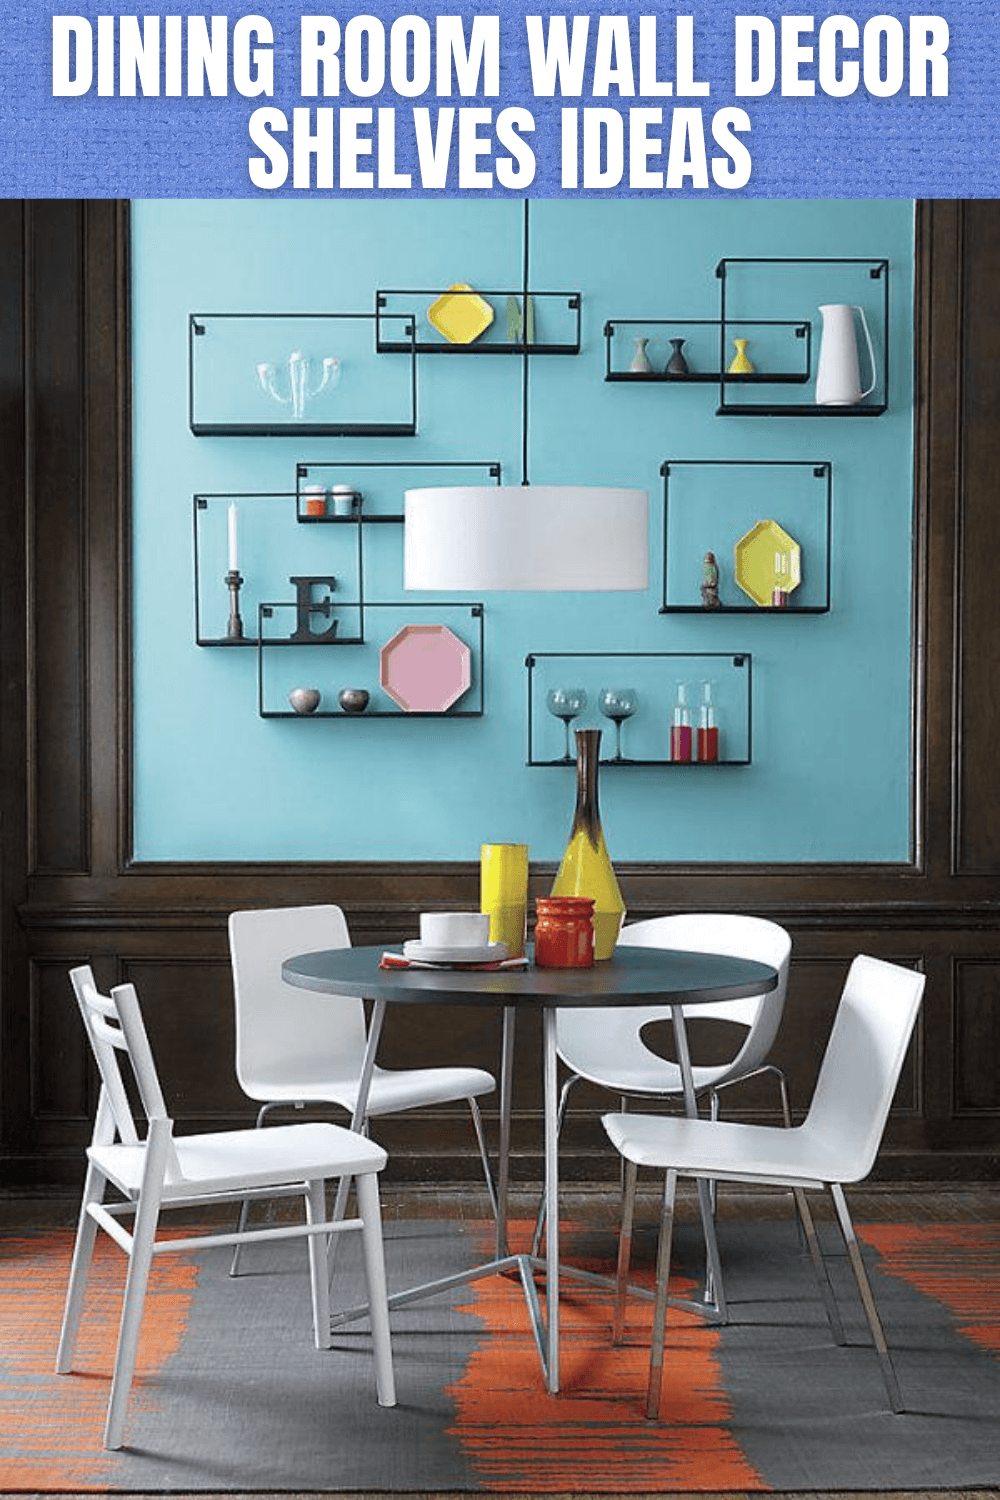 Amazing Dining Room Wall Decor Shelves Ideas For those looking for modern dining room ideas you've come to the right place. amazing dining room wall decor shelves